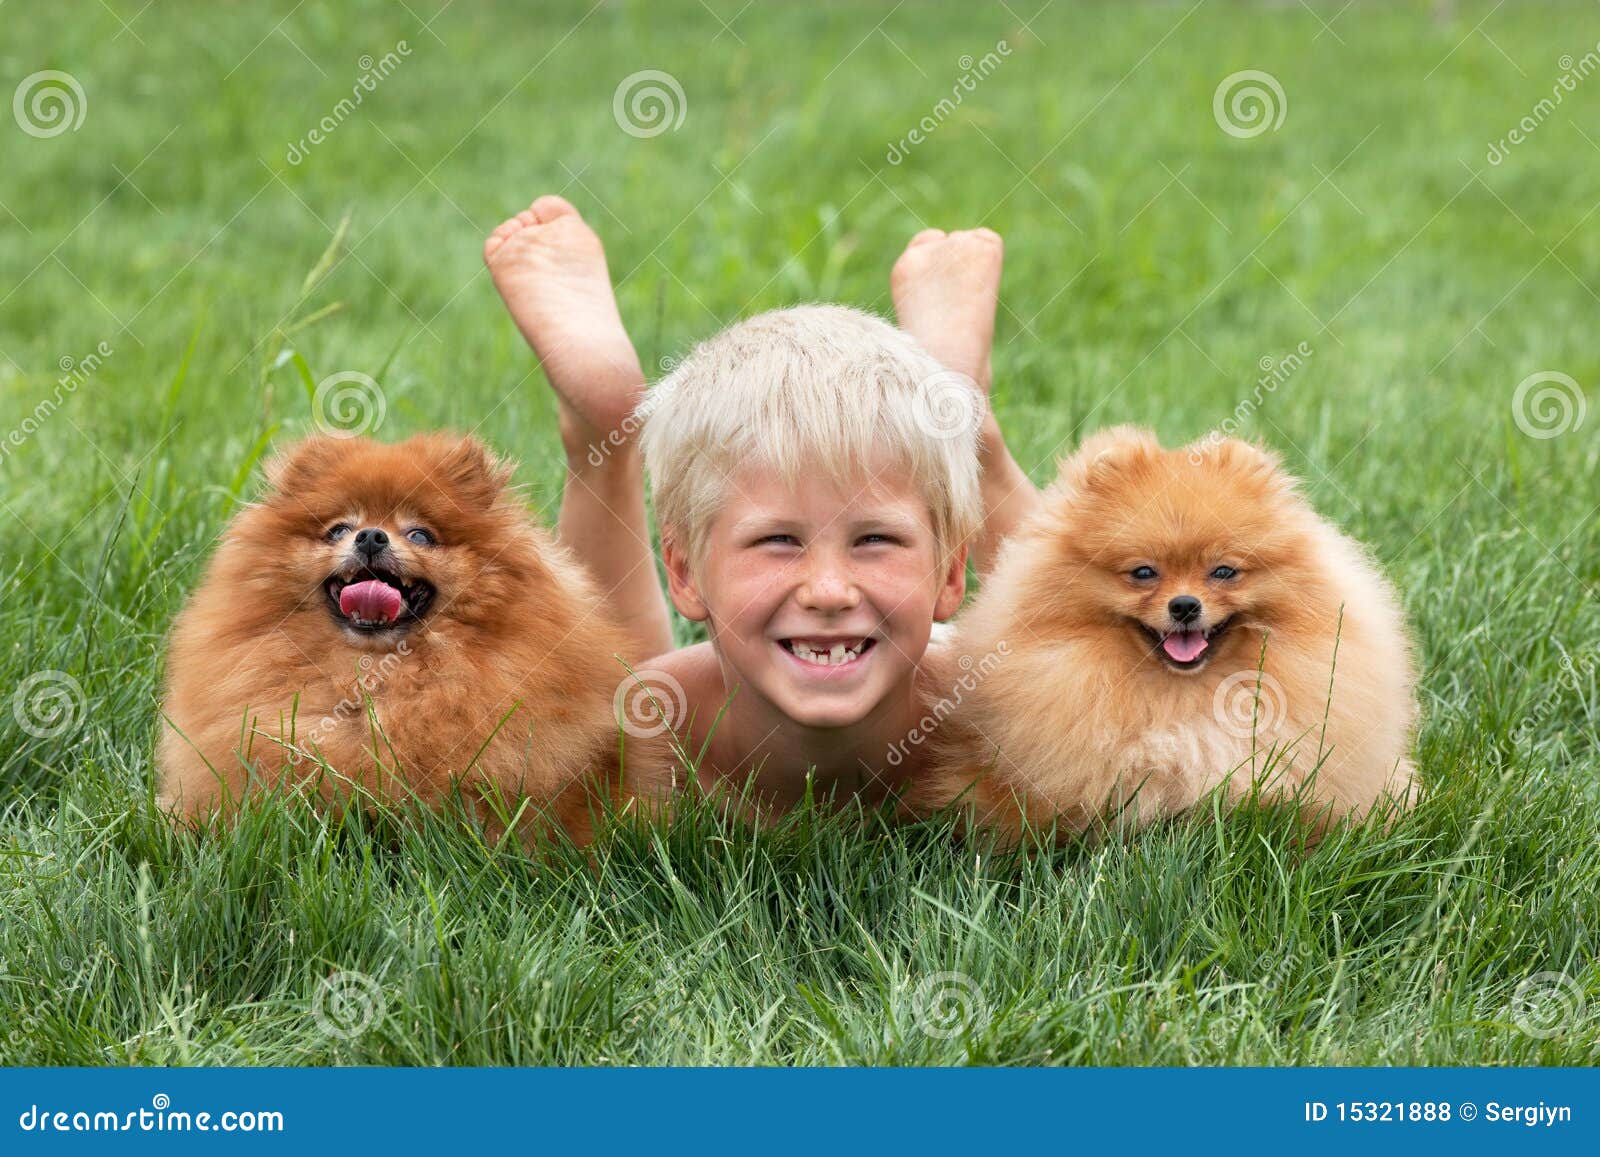 Two boys hugging stock photo. Image of friends, buddy 